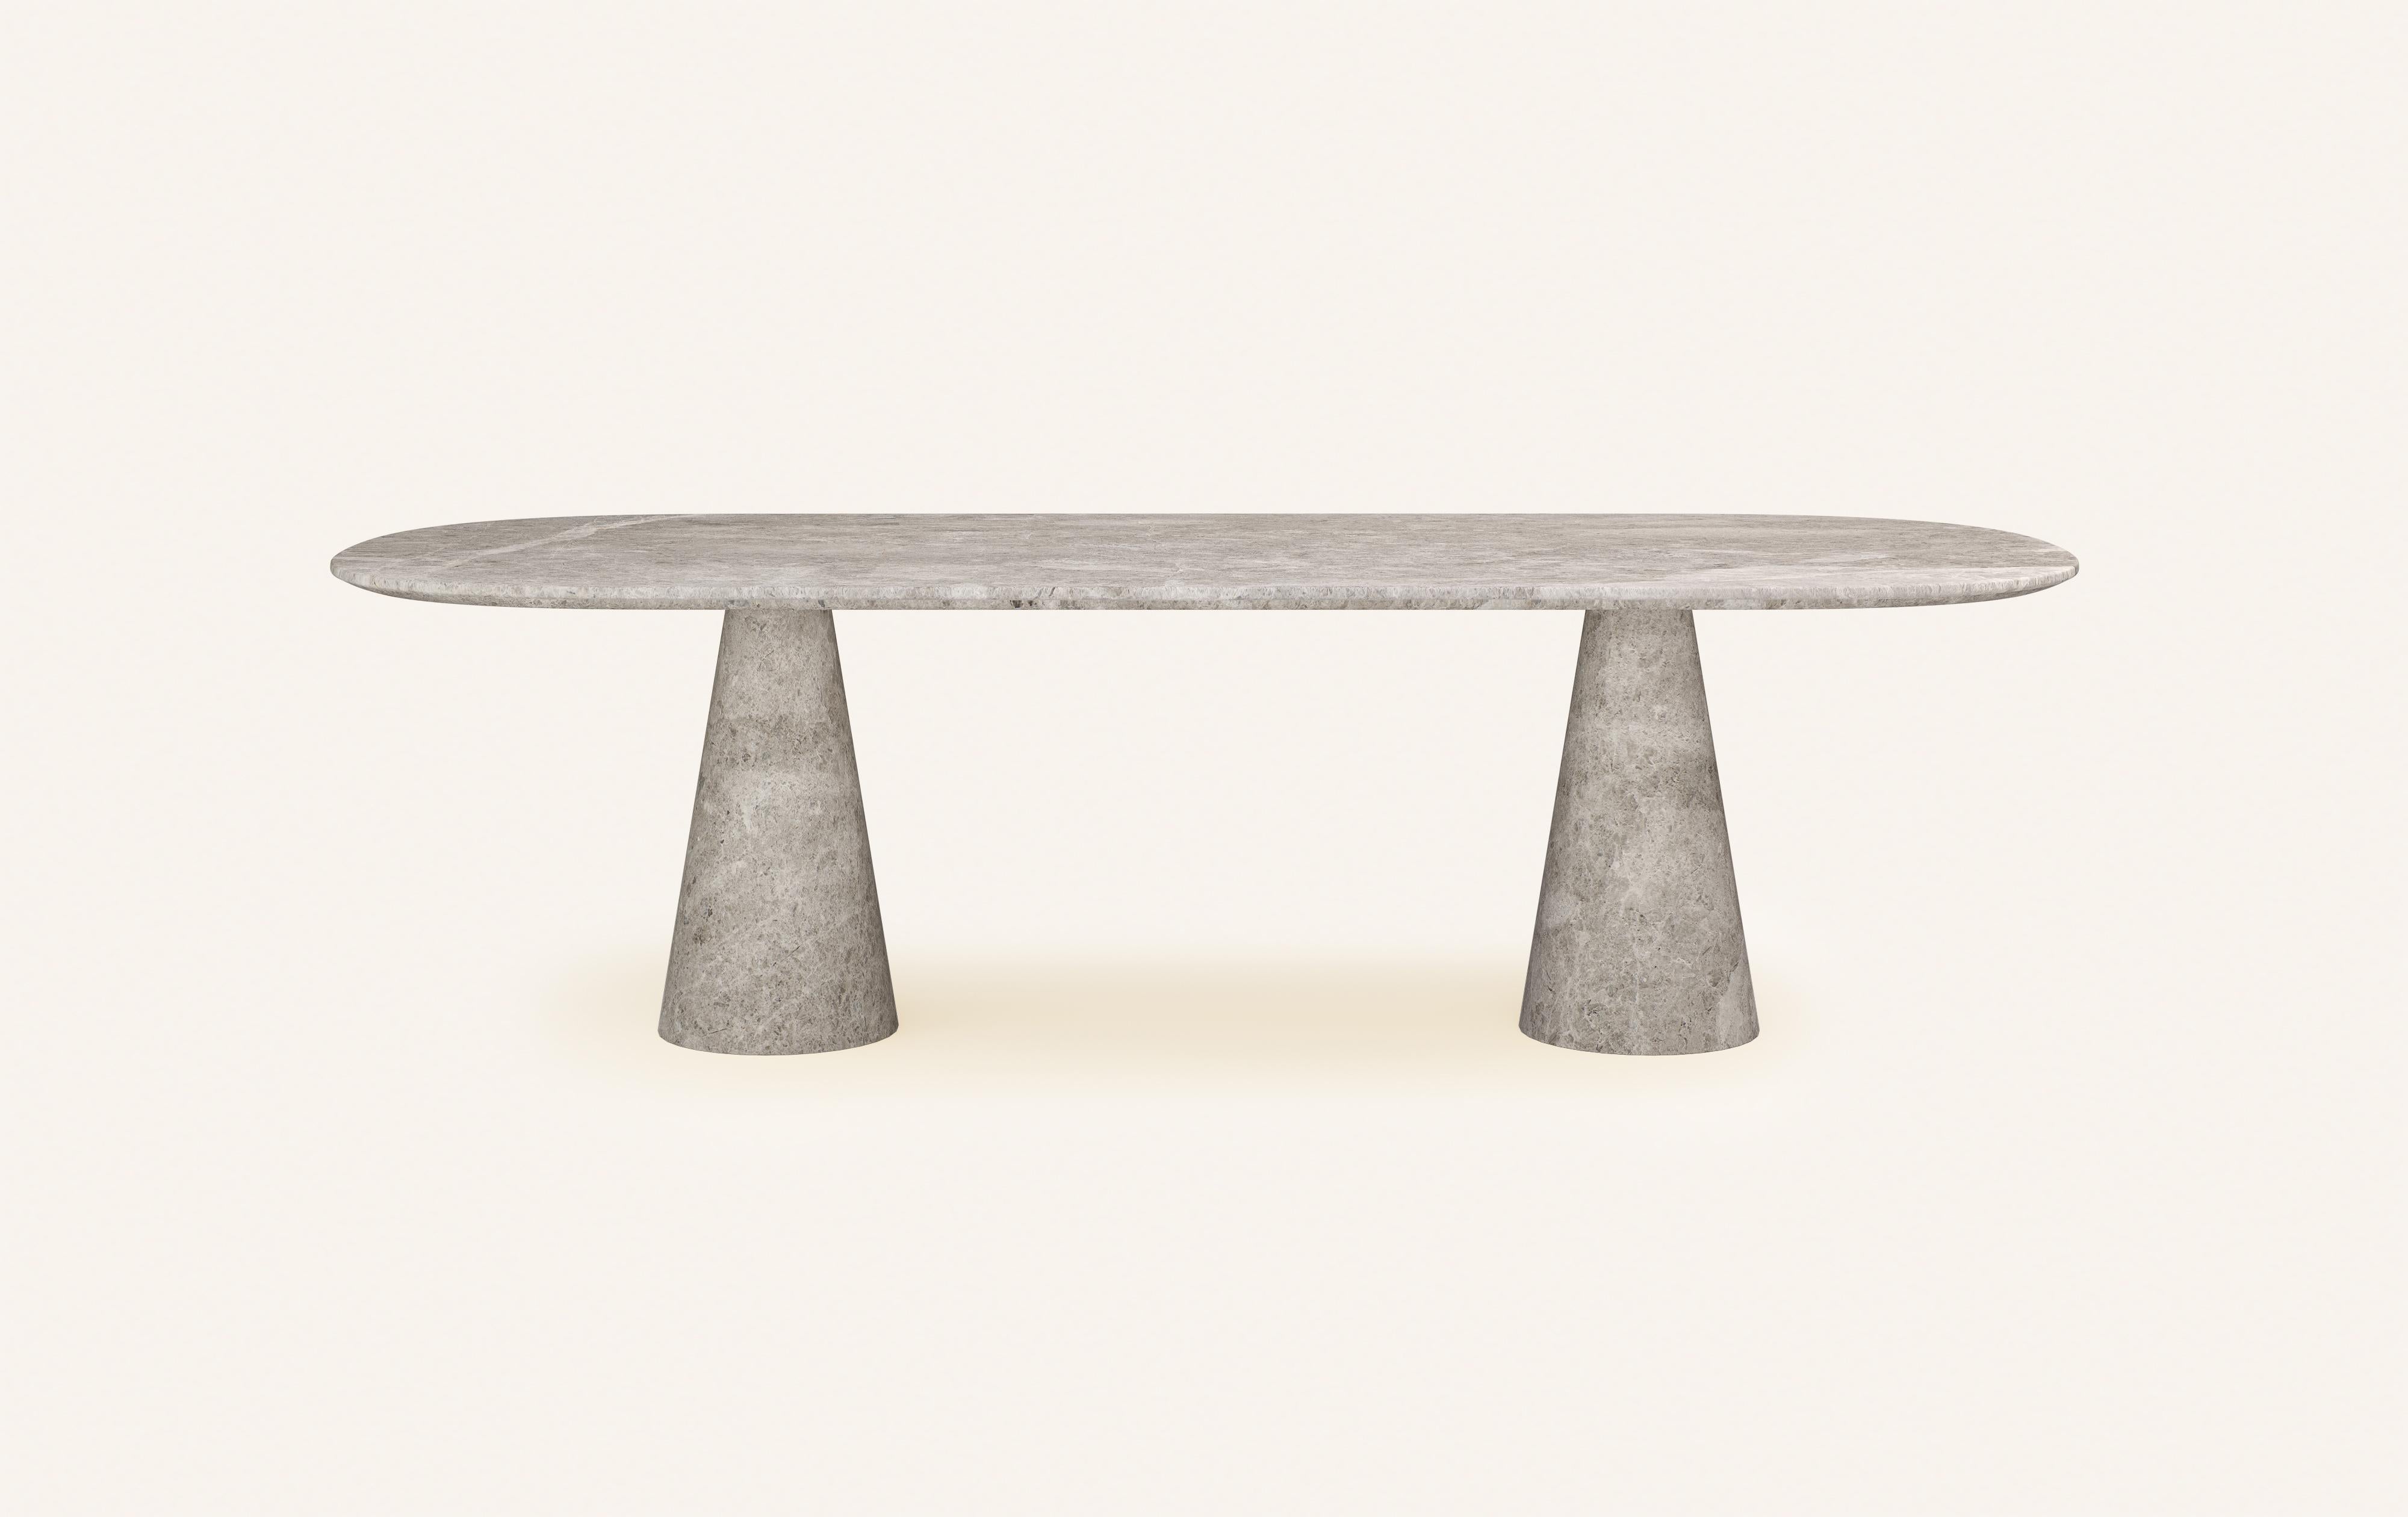 SIMPLISTIC YET MUSCULAR FORMS INFLUENCED BY POST MODERN ITALIAN DESIGN.

DIMENSIONS: 
84”L x 42”W x 30”H: 
- 1.5